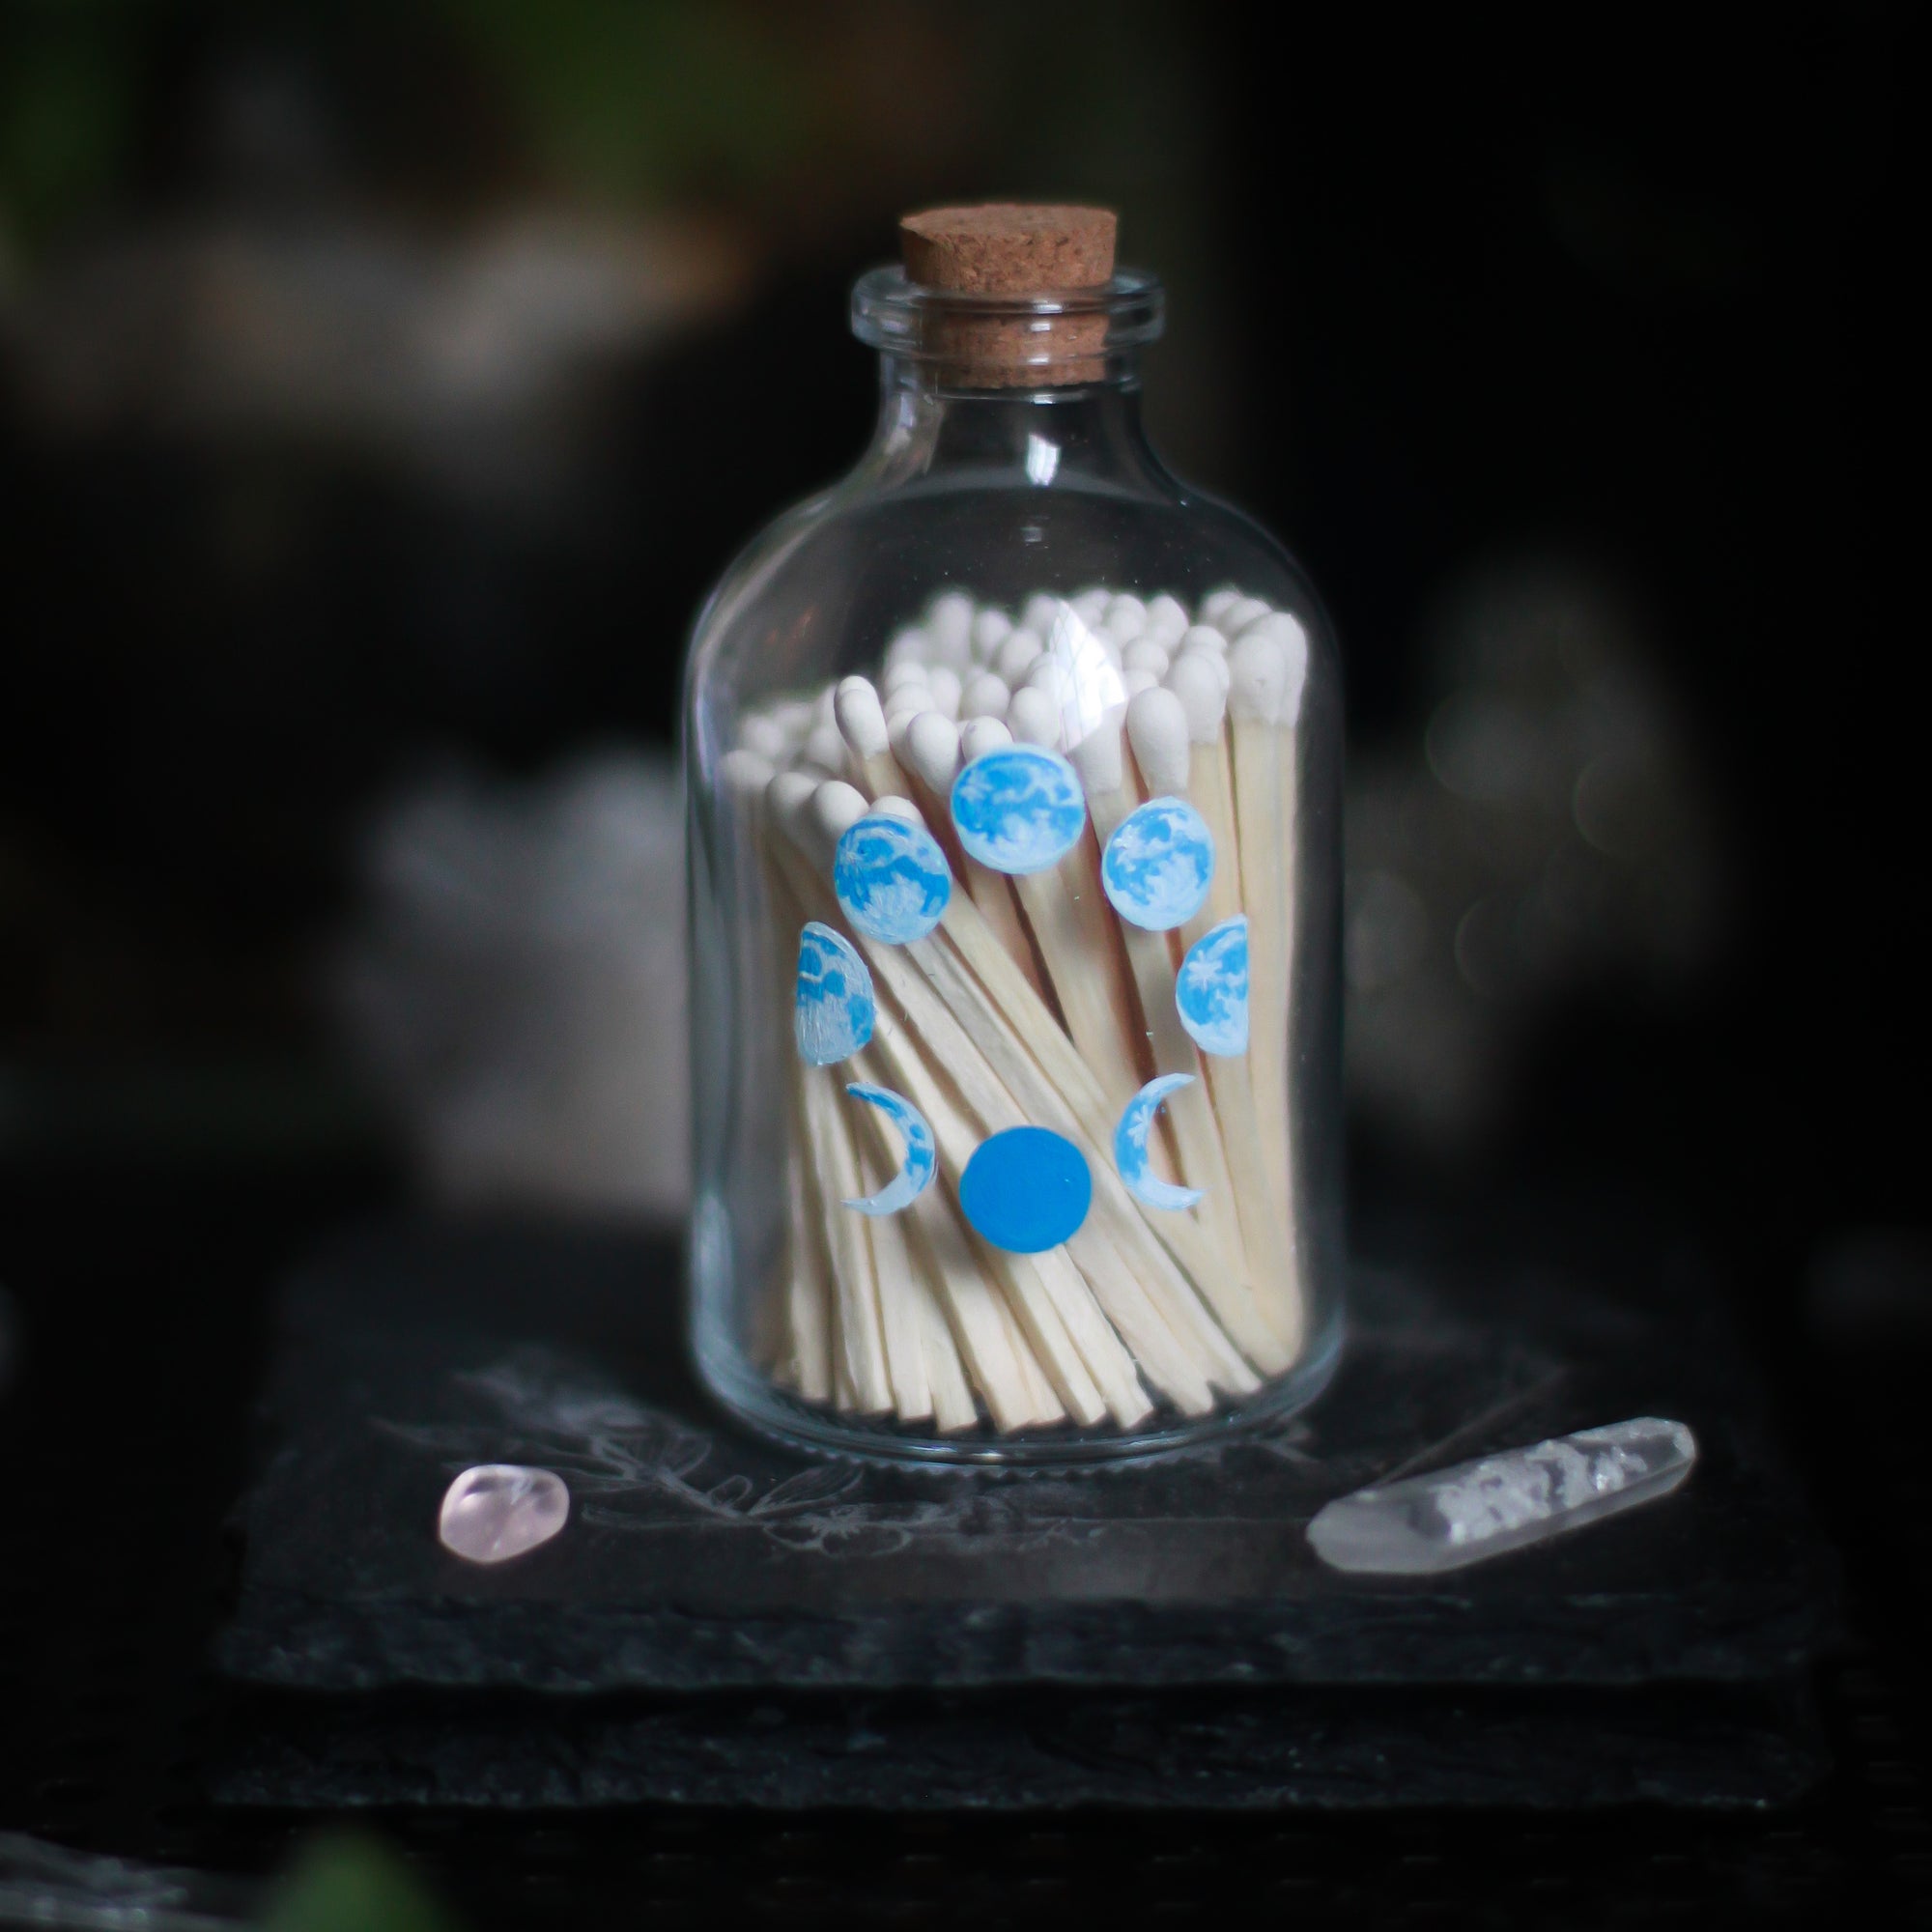 A glass bottle, 3" tall and 1.5" in diameter, with a cork top rests upon a dark surface and background with some crystals visible in the scene. The bottle has 8 phases of the moon painted in shades of blue, all arranged in a circle and visible on the front of the bottle. The full moon is at the top of the arrangement and the new moon, painted in solid blue, is at the bottom. The bottle is filled with wooden matches with white tops.